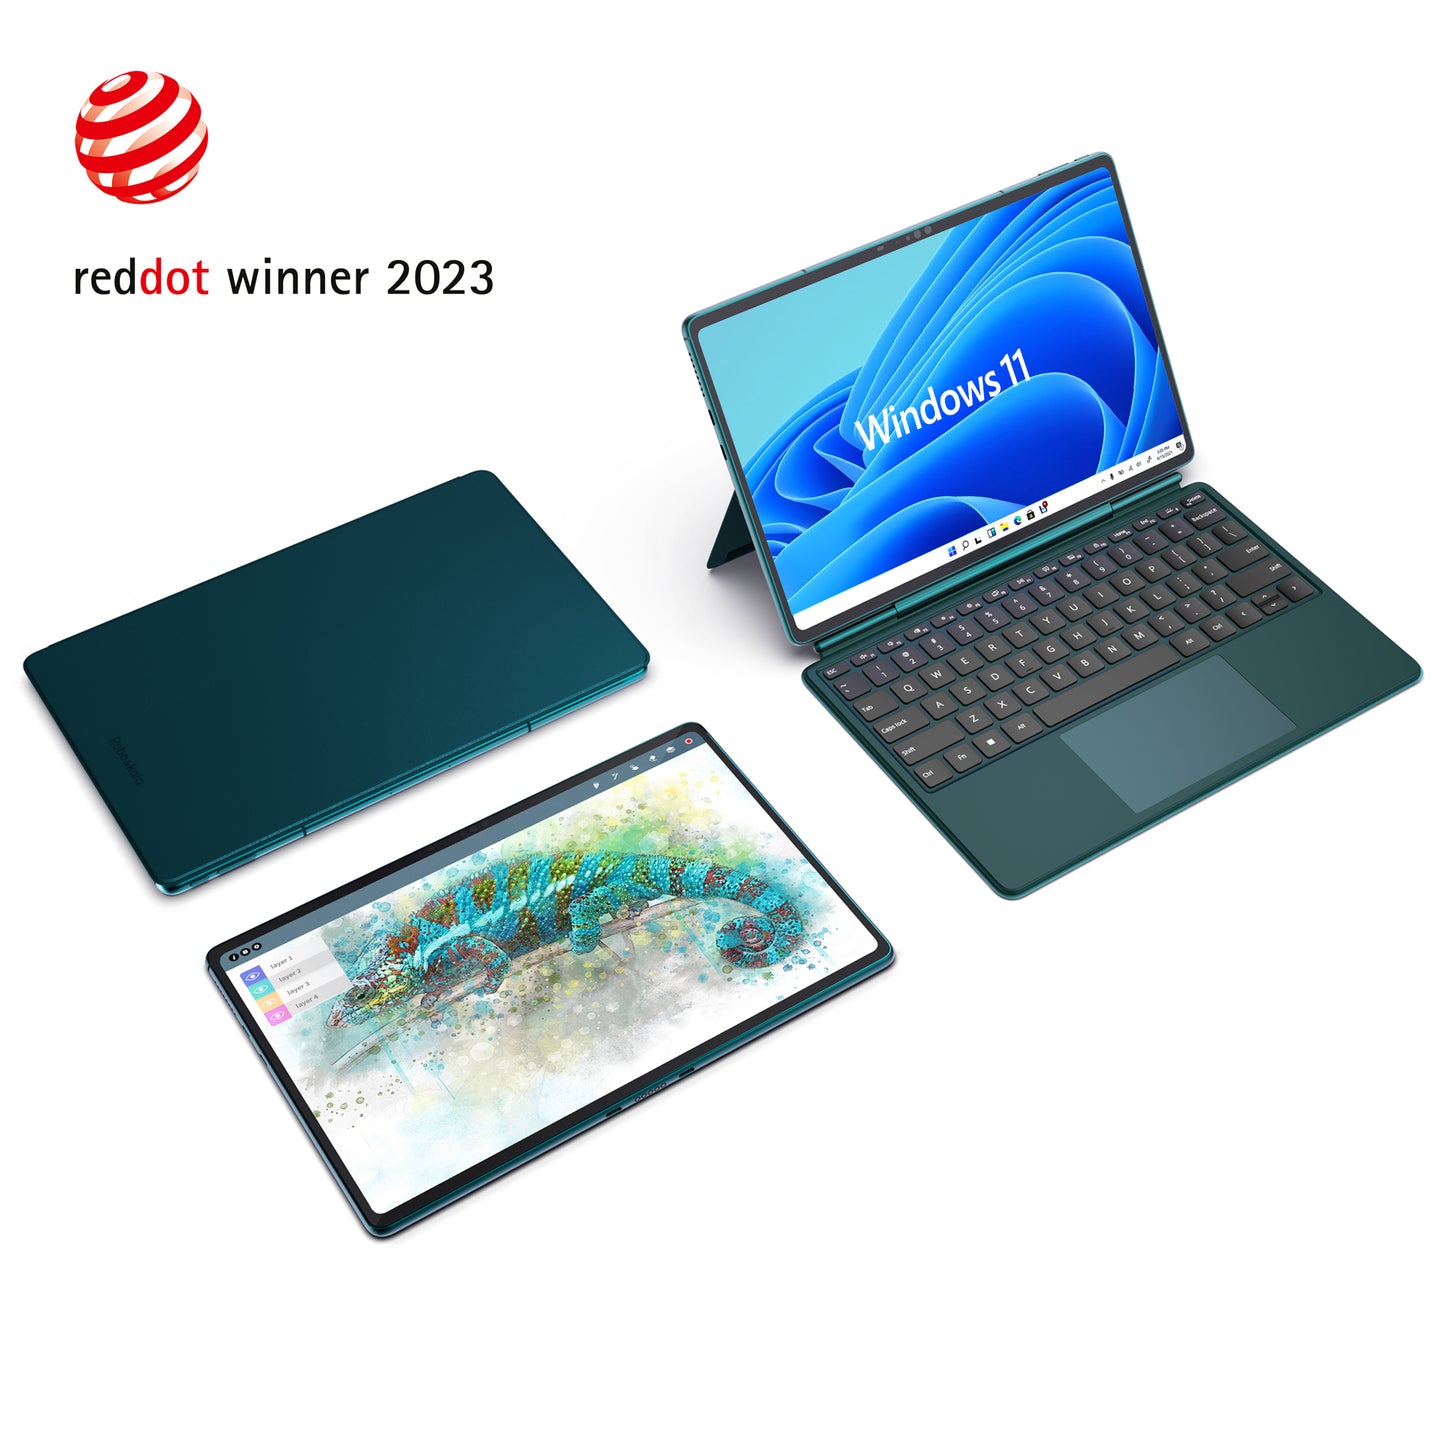 Robo & The world's thinnest and lightest 2-in-1 laptop